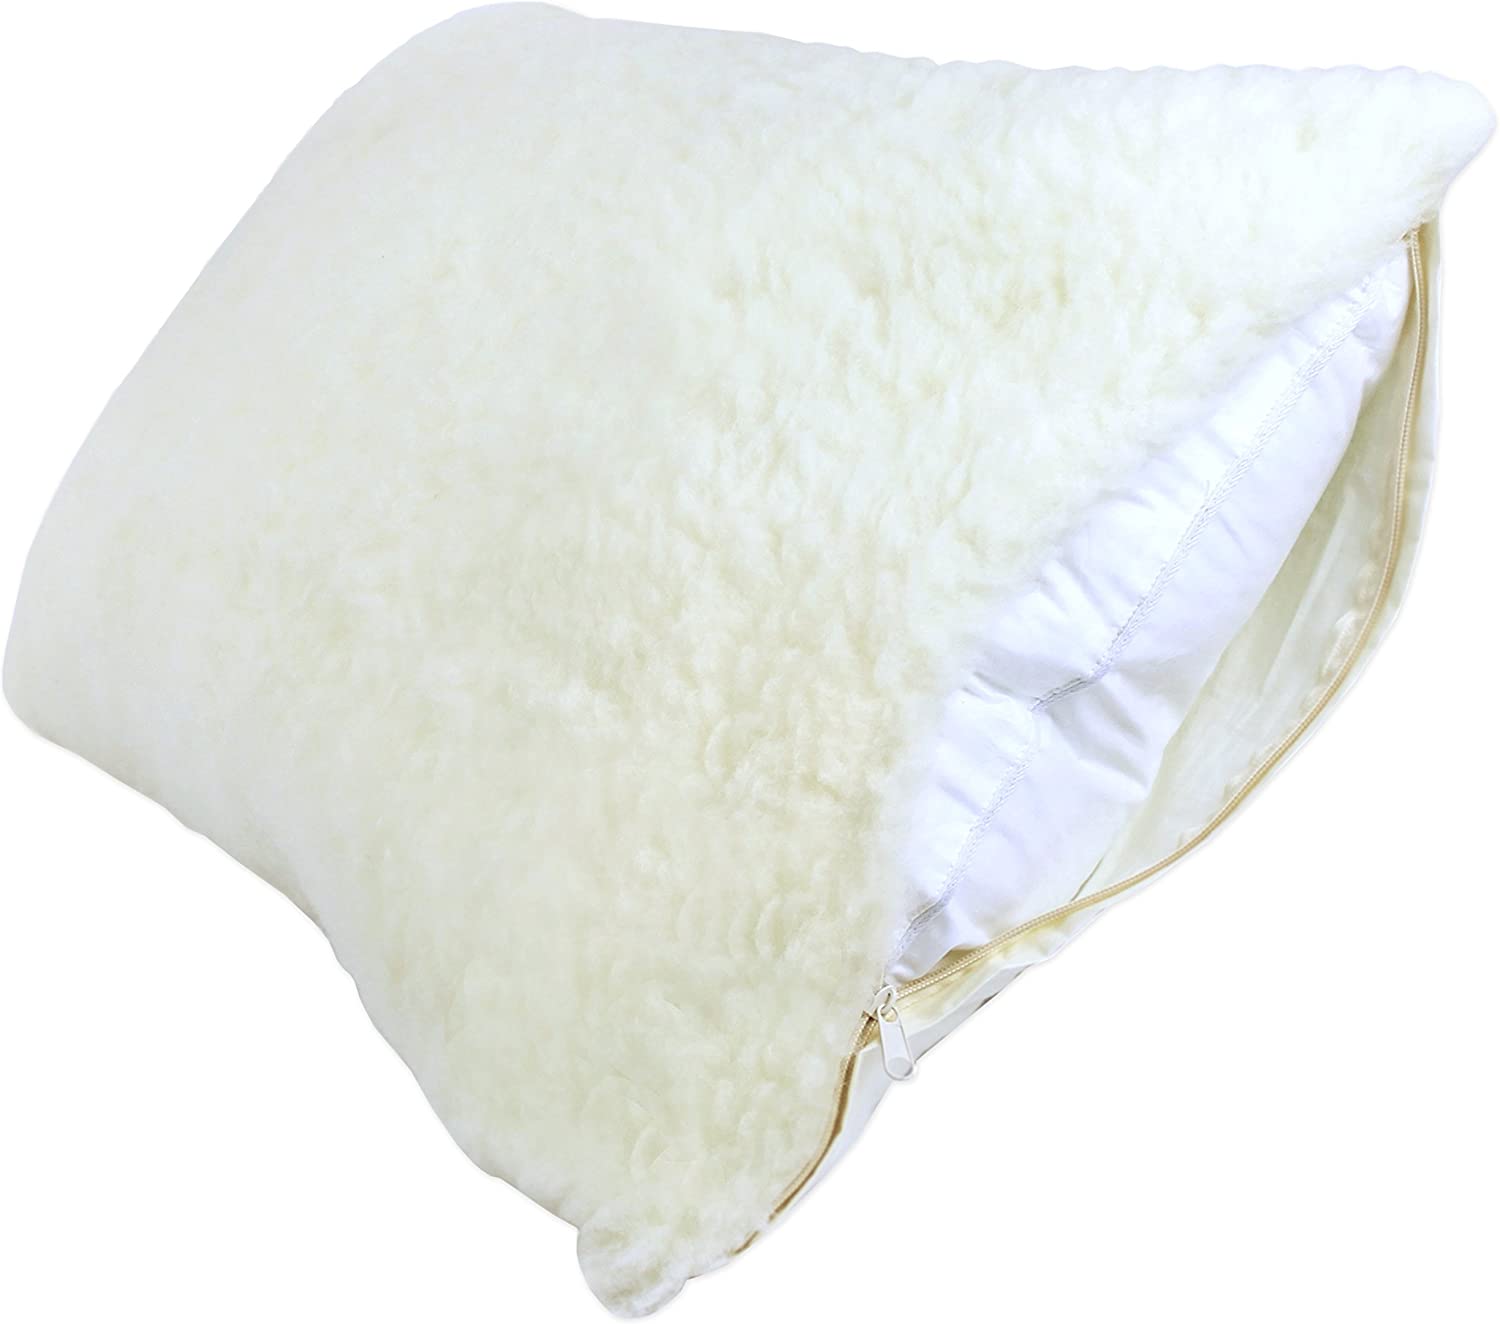 Century Home Signature Collection Woolmark Certified Pure Wool Fleece Pillow Protector, King